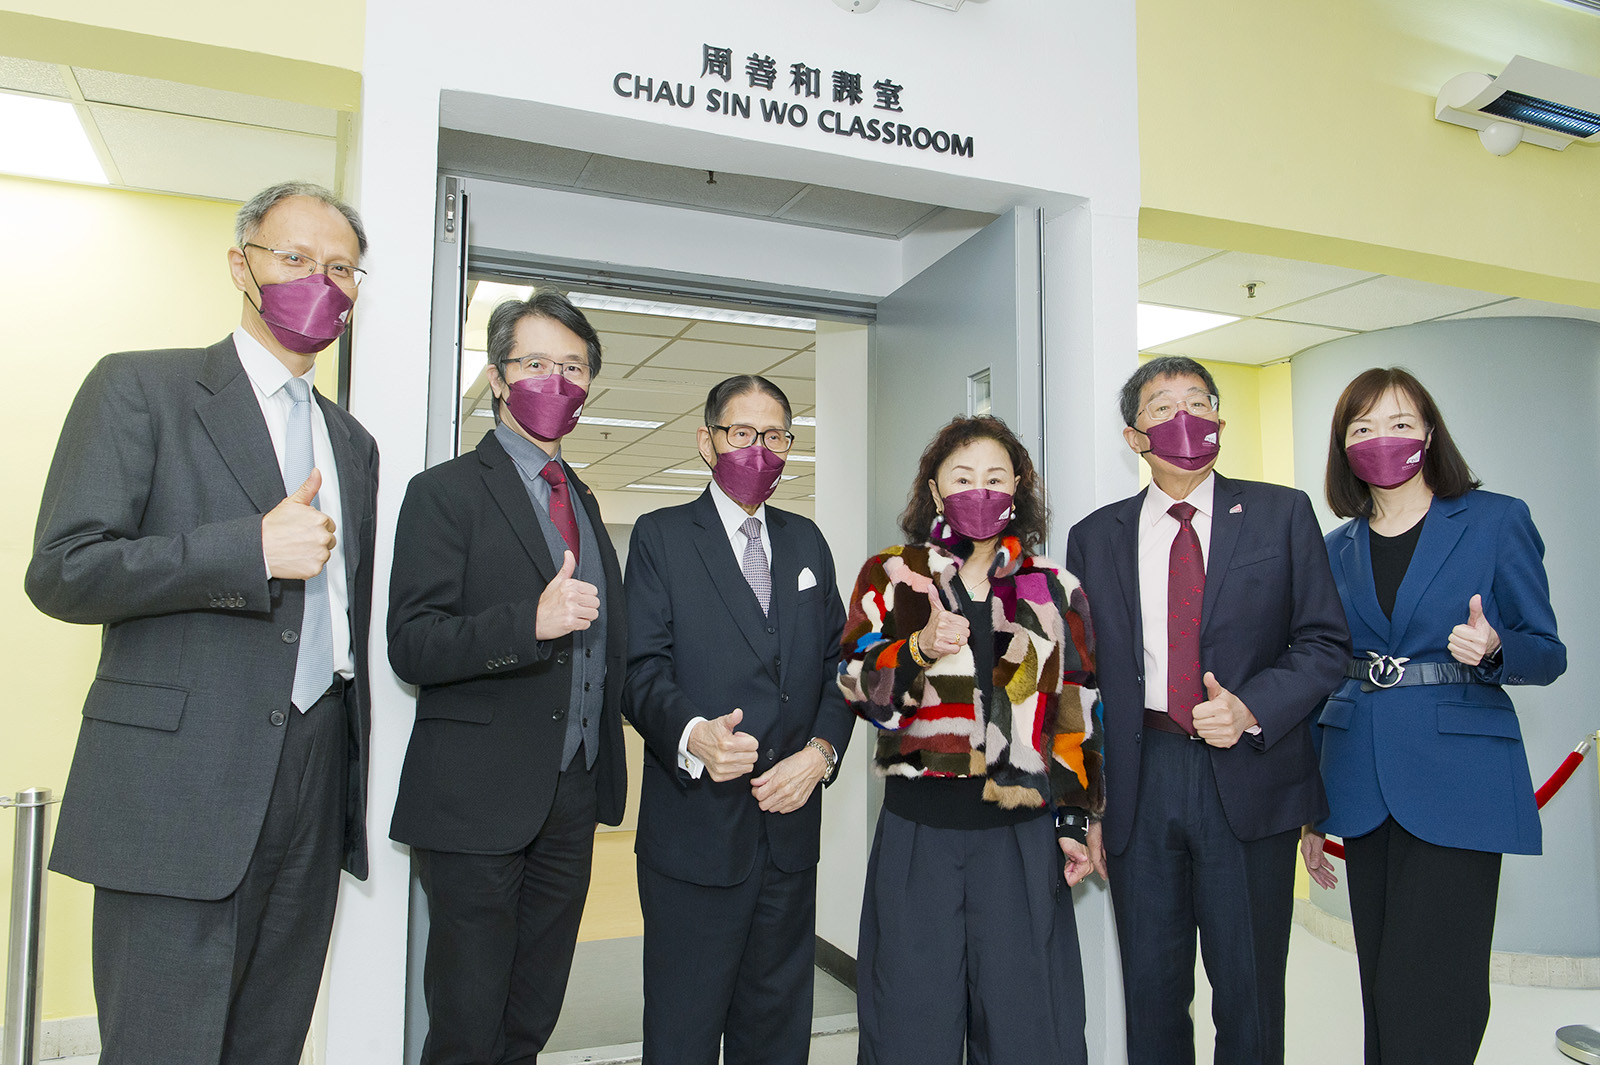 One of the classrooms at CityU has been named “Chau Sin Wo Classroom” in appreciation of Ms Chau’s generous support.